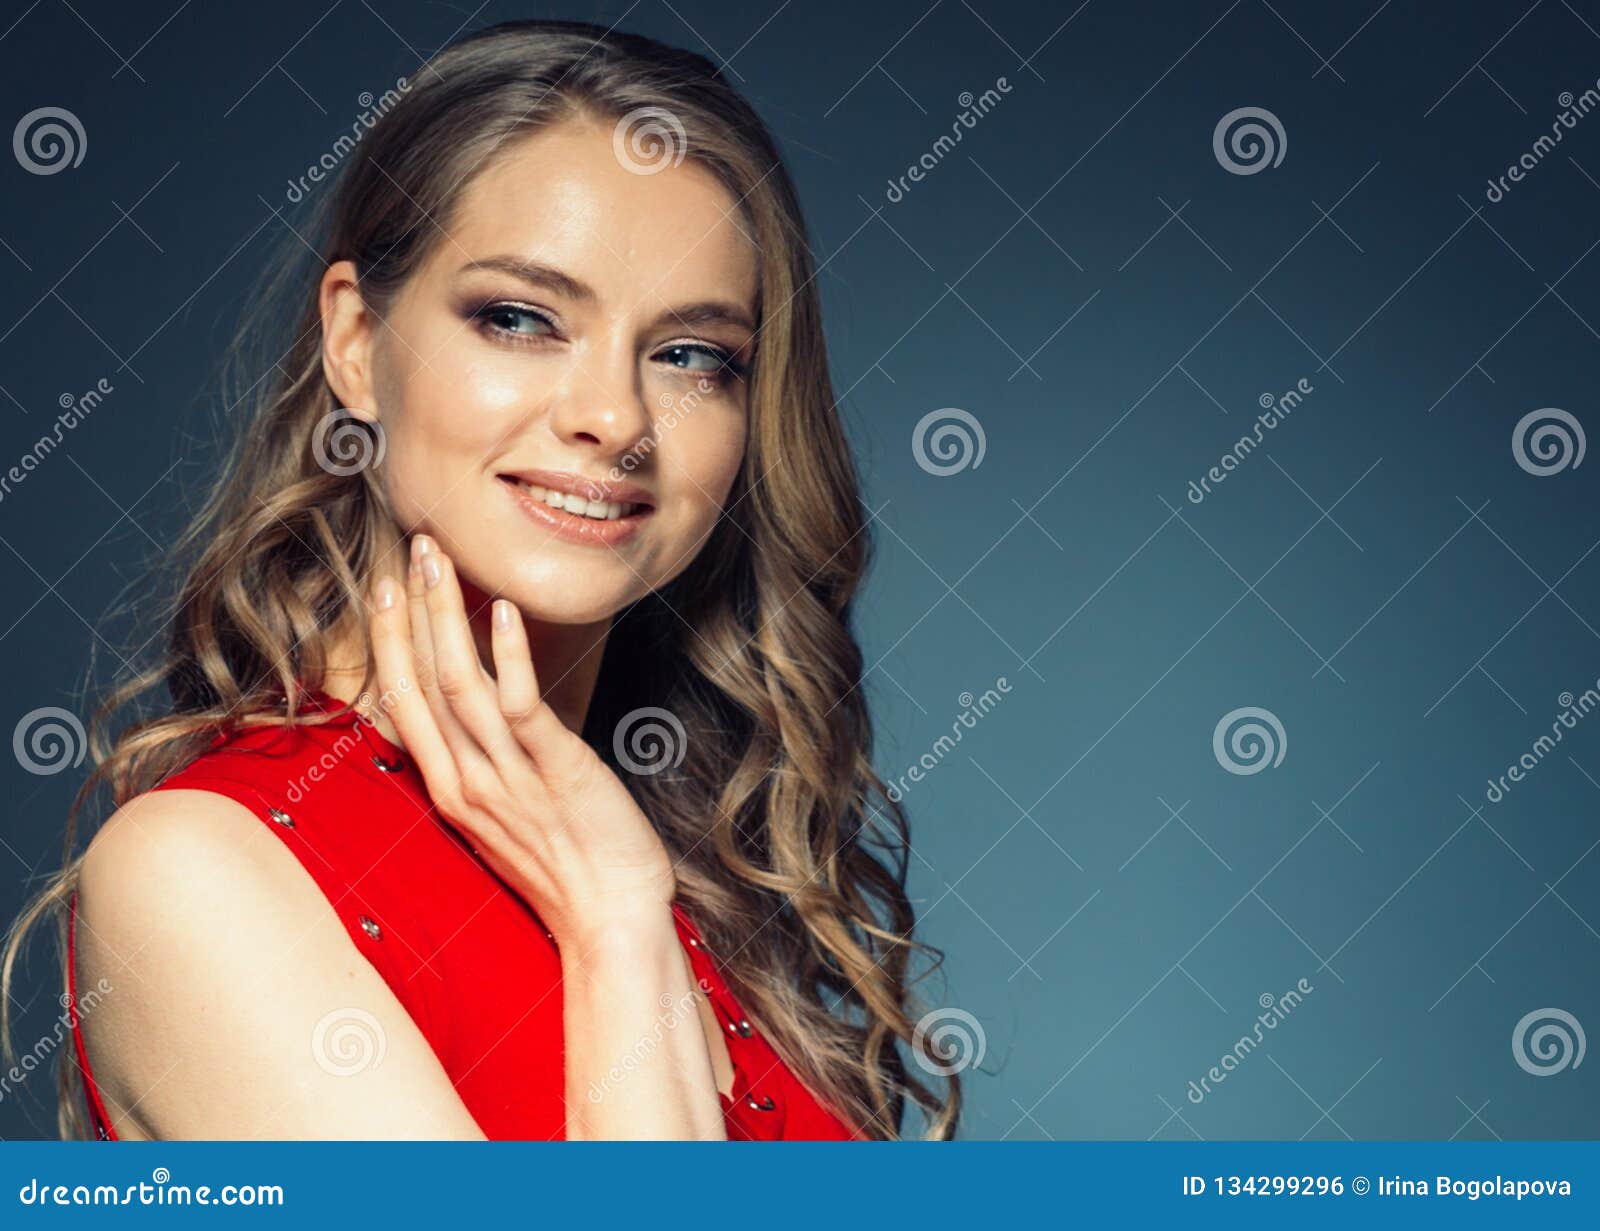 Woman in Red Dress with Long Blonde Hair Stock Photo - Image of looking ...